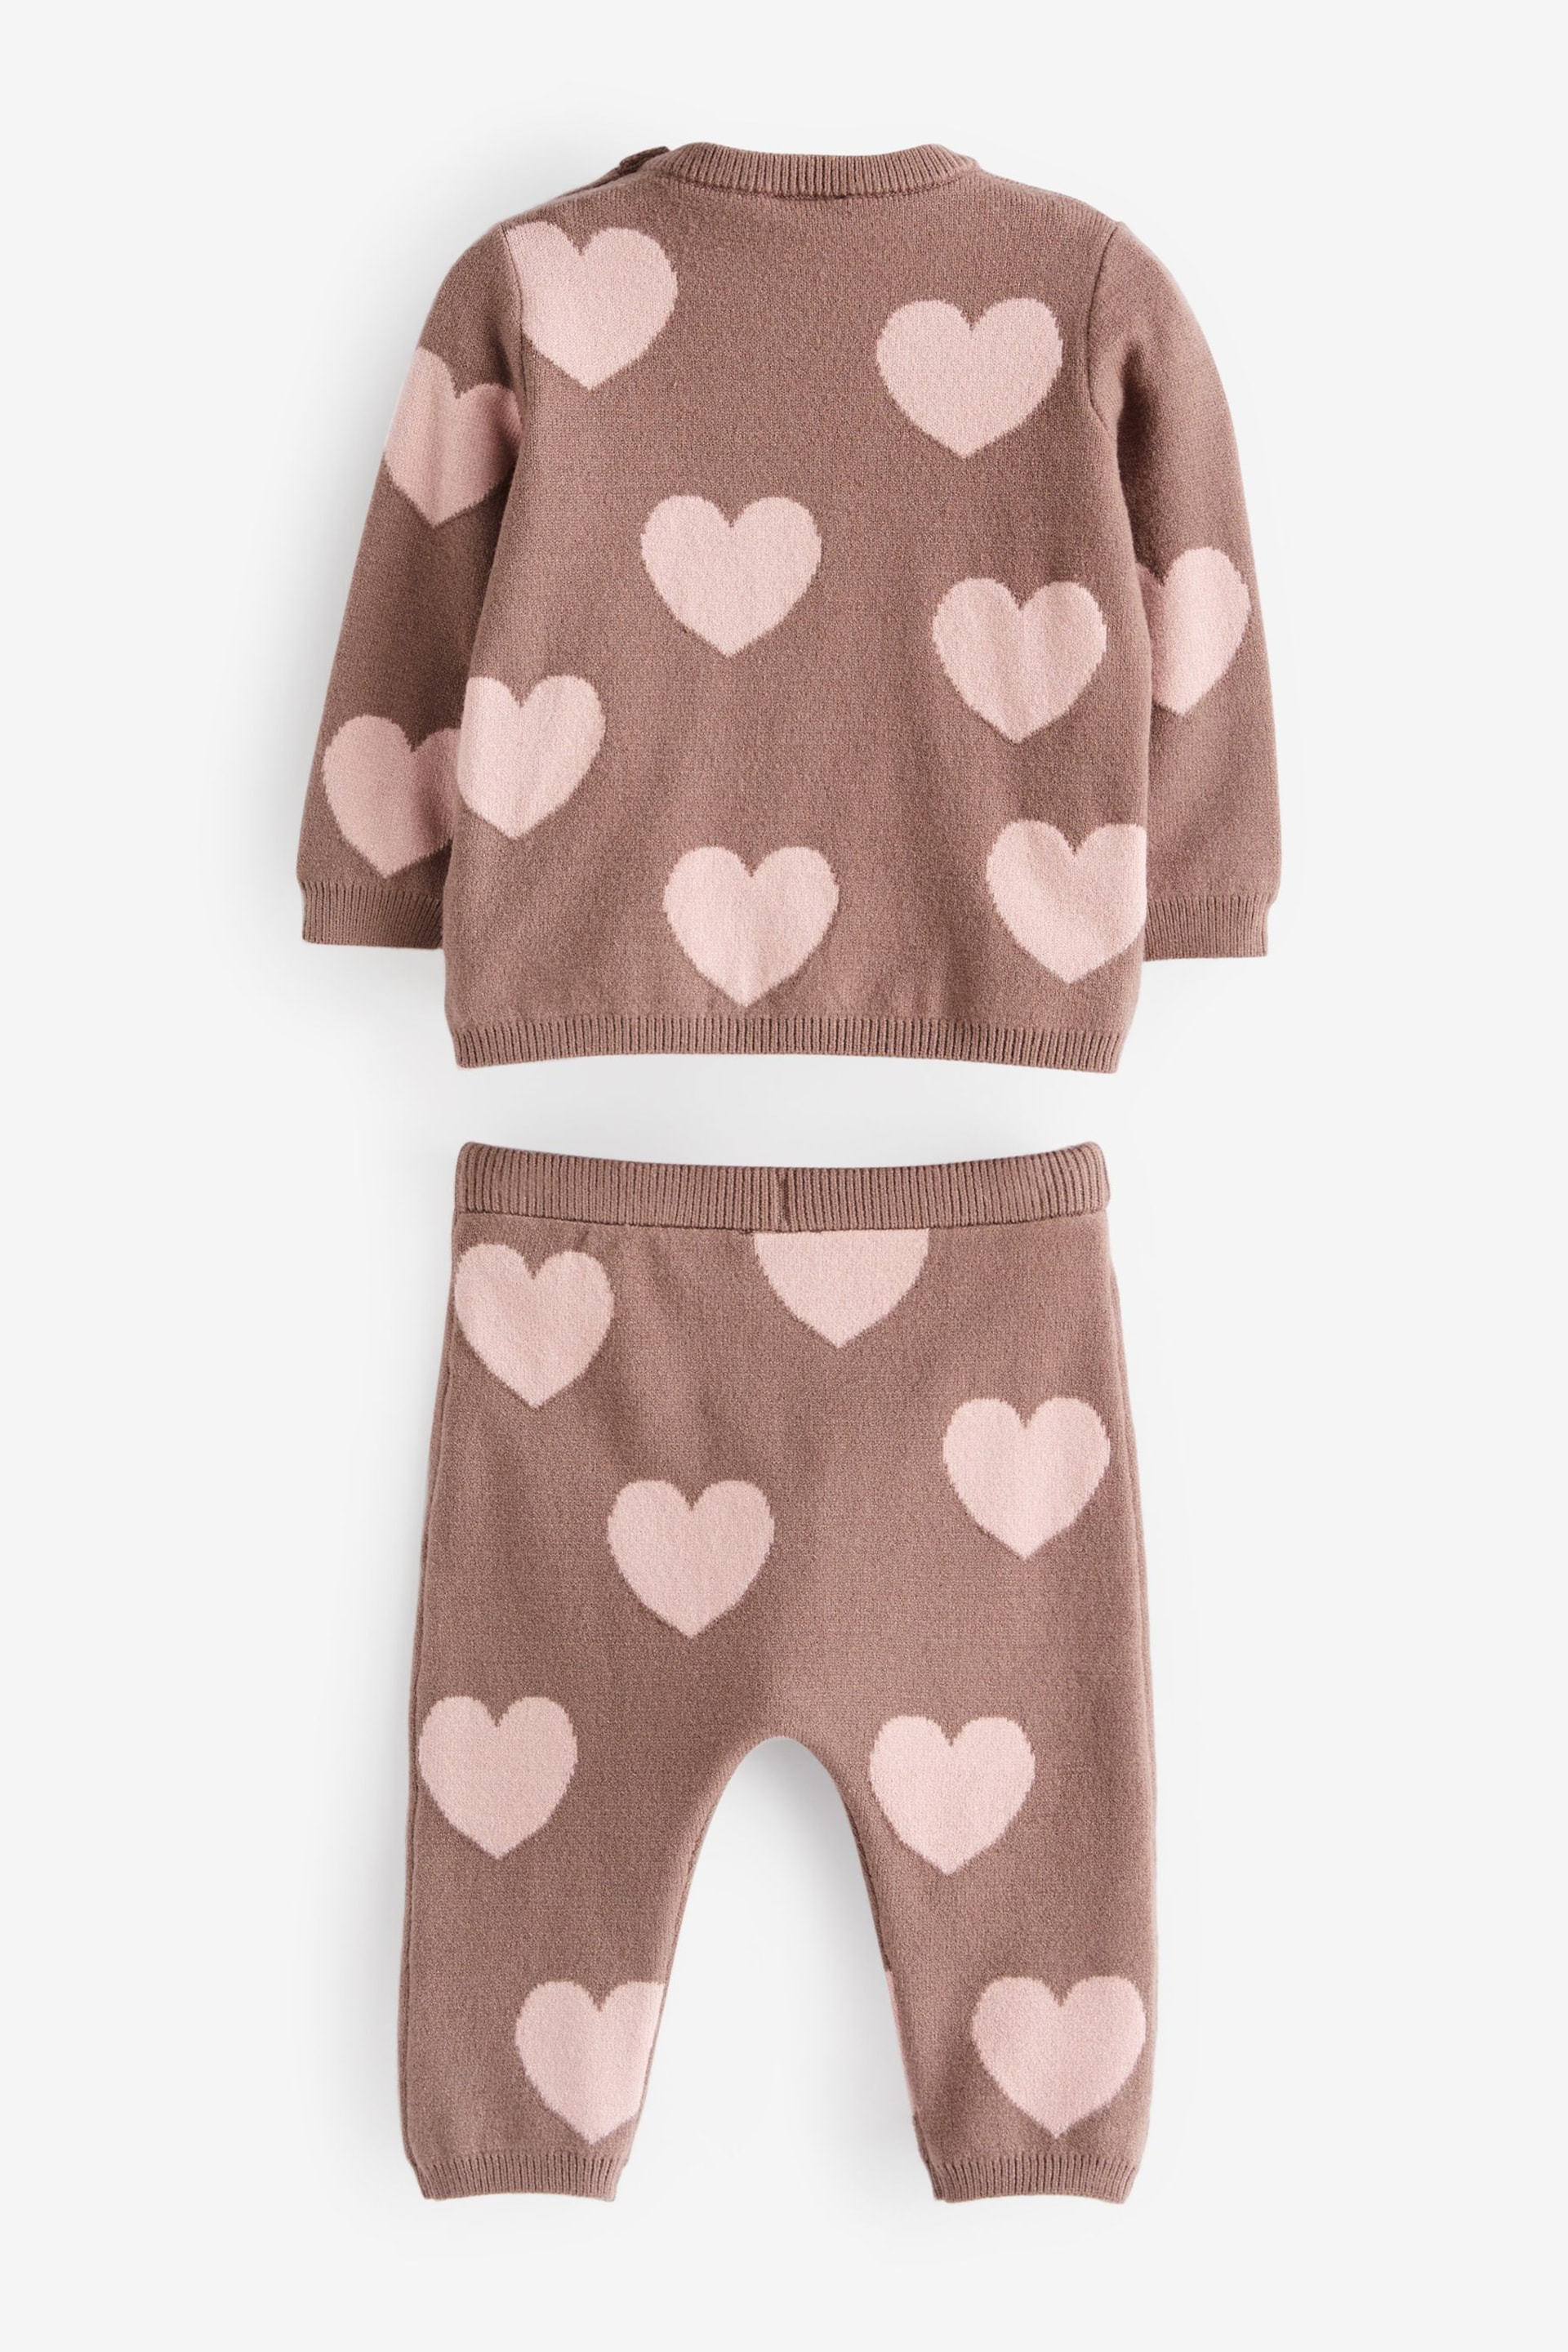 Chocolate Brown Heart Print Knitted Baby 2 Piece Set (0mths-2yrs) - Image 5 of 5